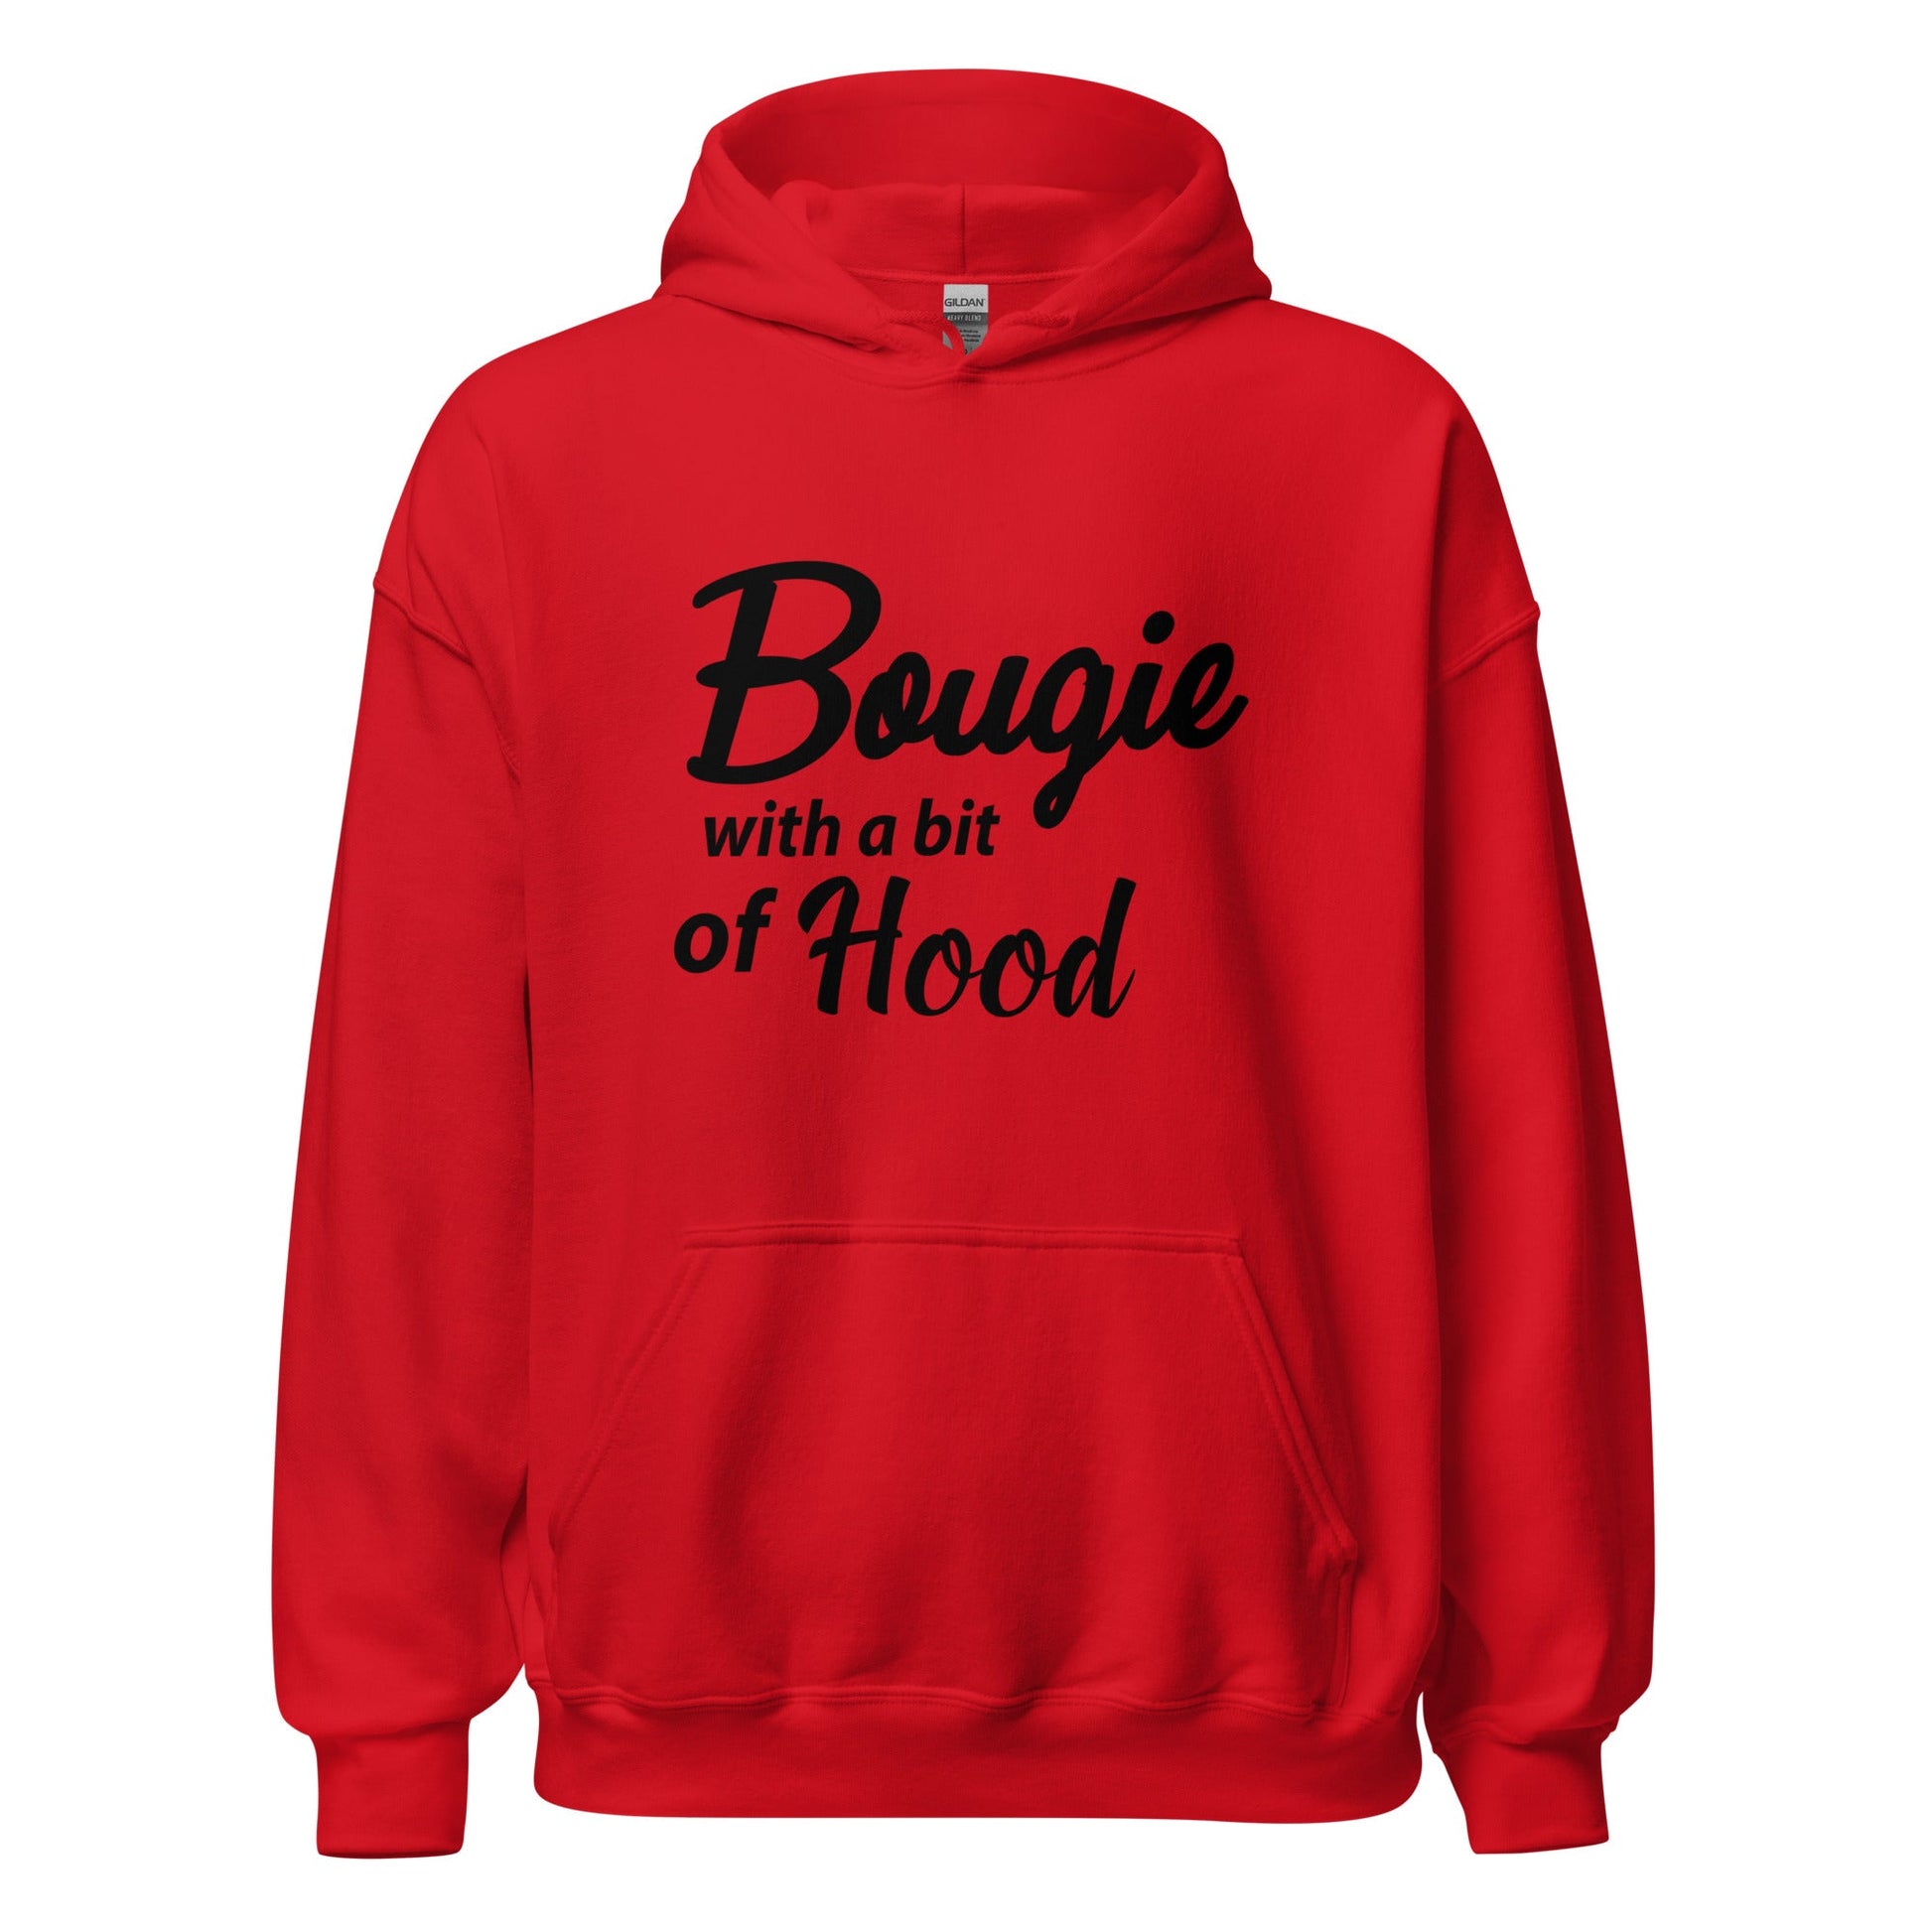 Bougie with a bit of Hood Unisex Hoodie - Catch This Tea Shirts